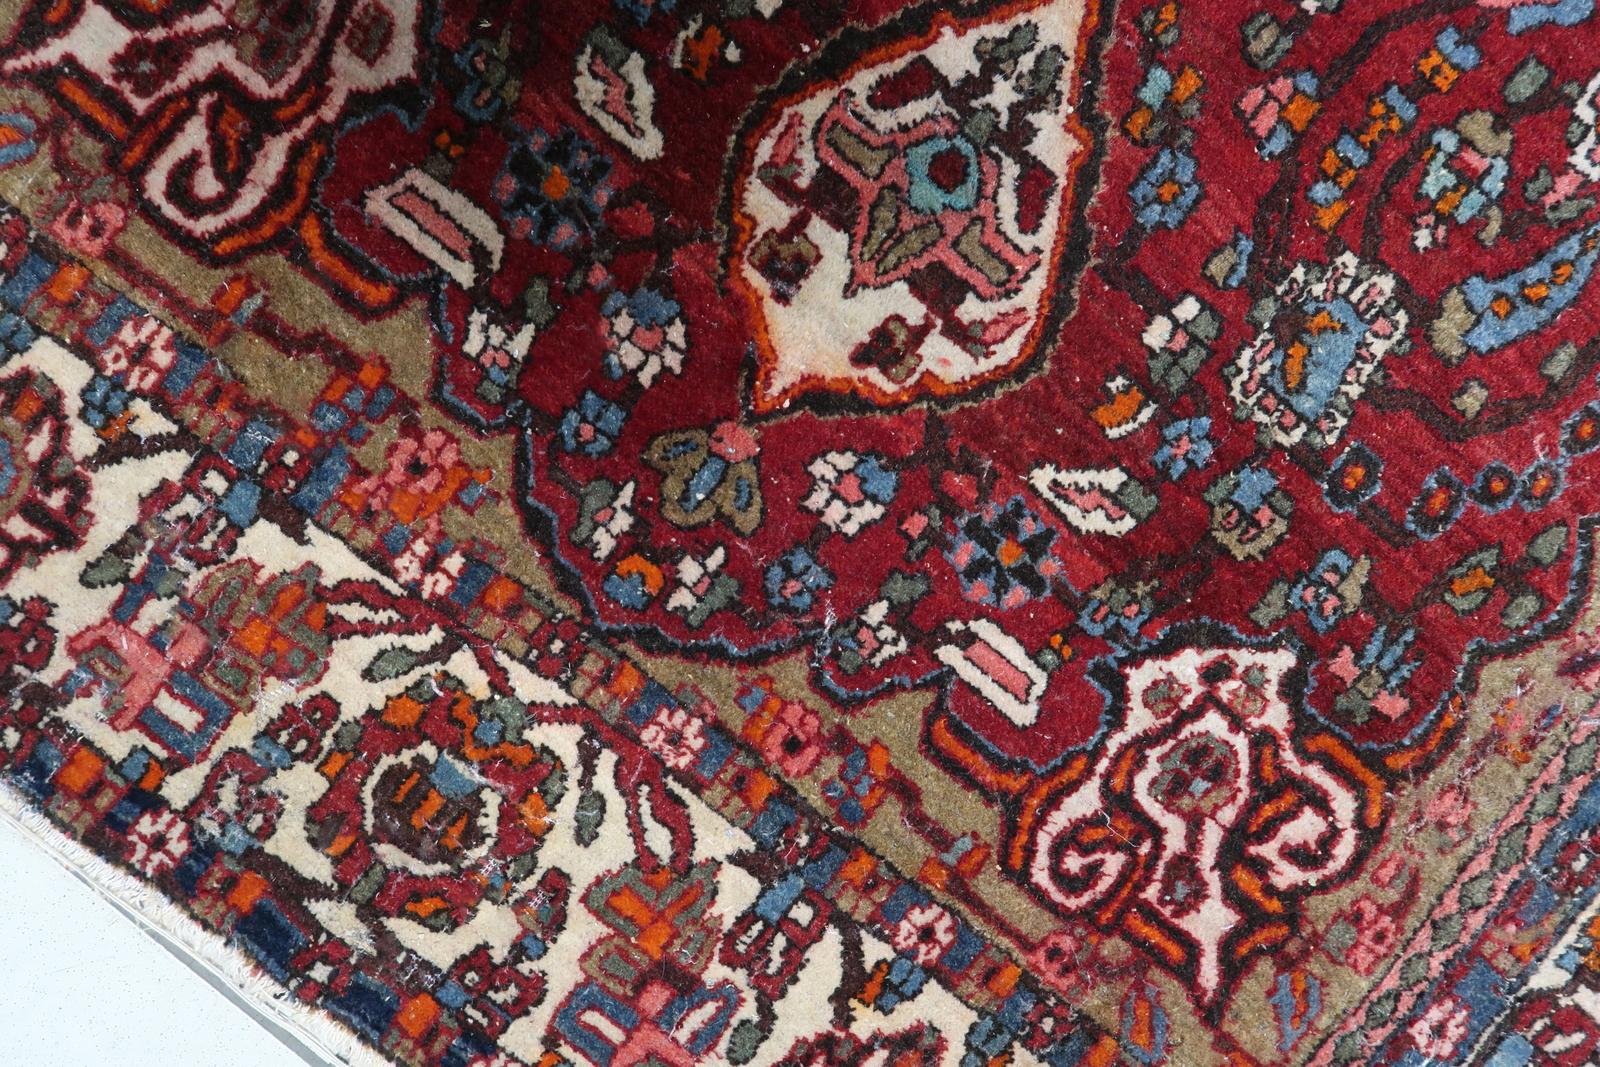 Chinese Handmade Vintage Persian Style Mahal Rug 1950s - 1C1080 For Sale